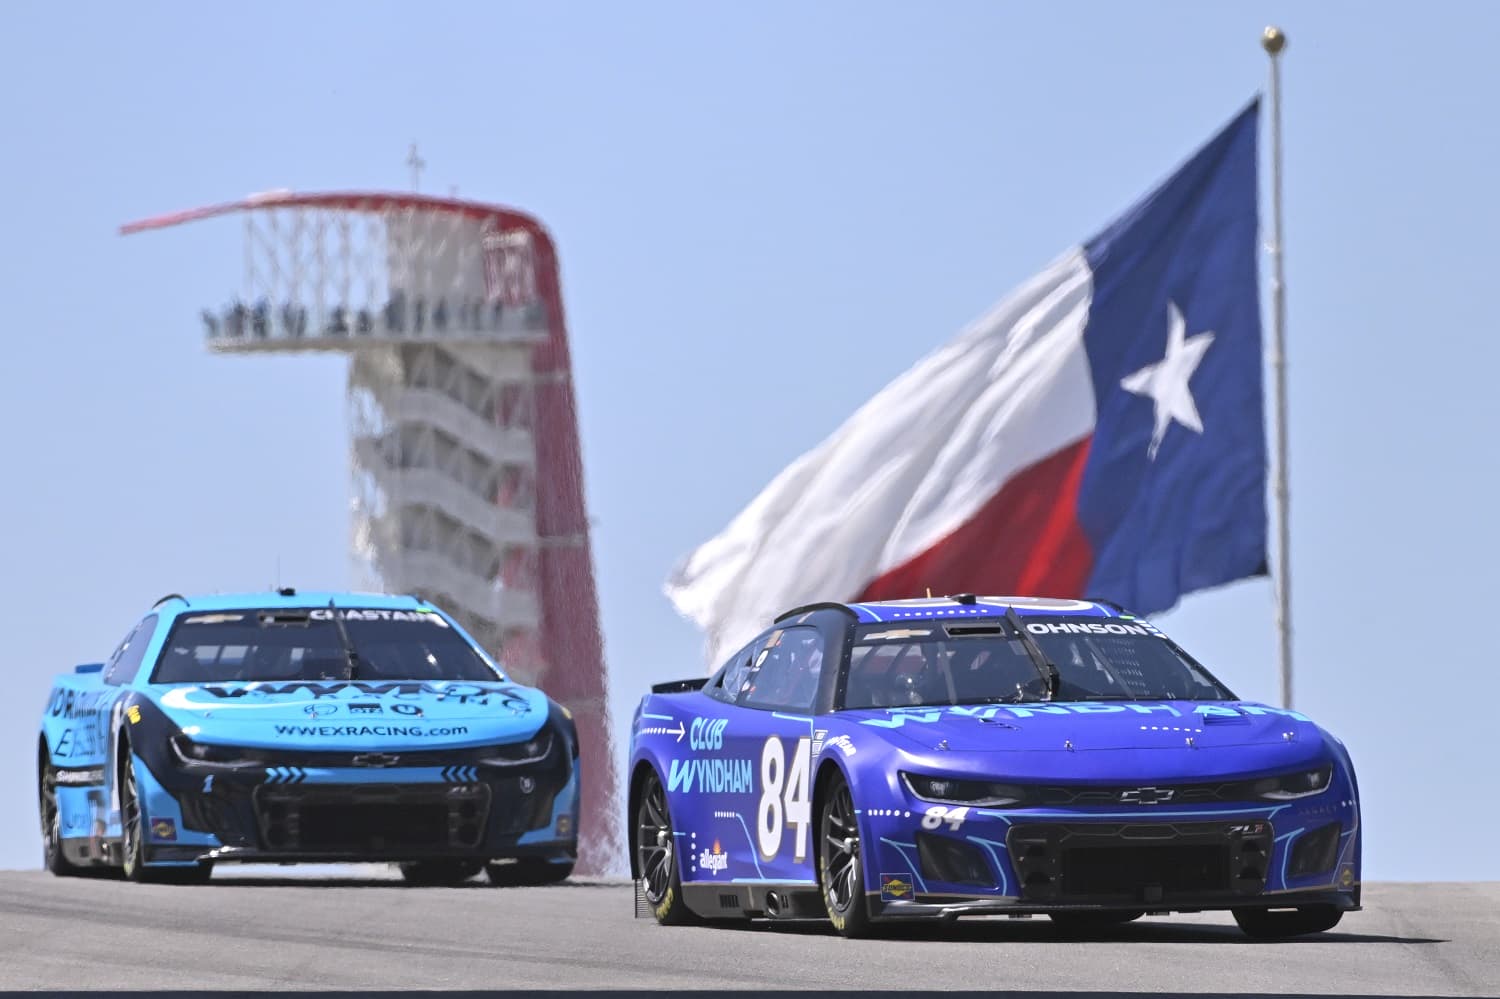 Jimmie Johnson and Ross Chastain drive during practice for the NASCAR Cup Series EchoPark Automotive Grand Prix at Circuit of The Americas on March 24, 2023. | Logan Riely/Getty Images